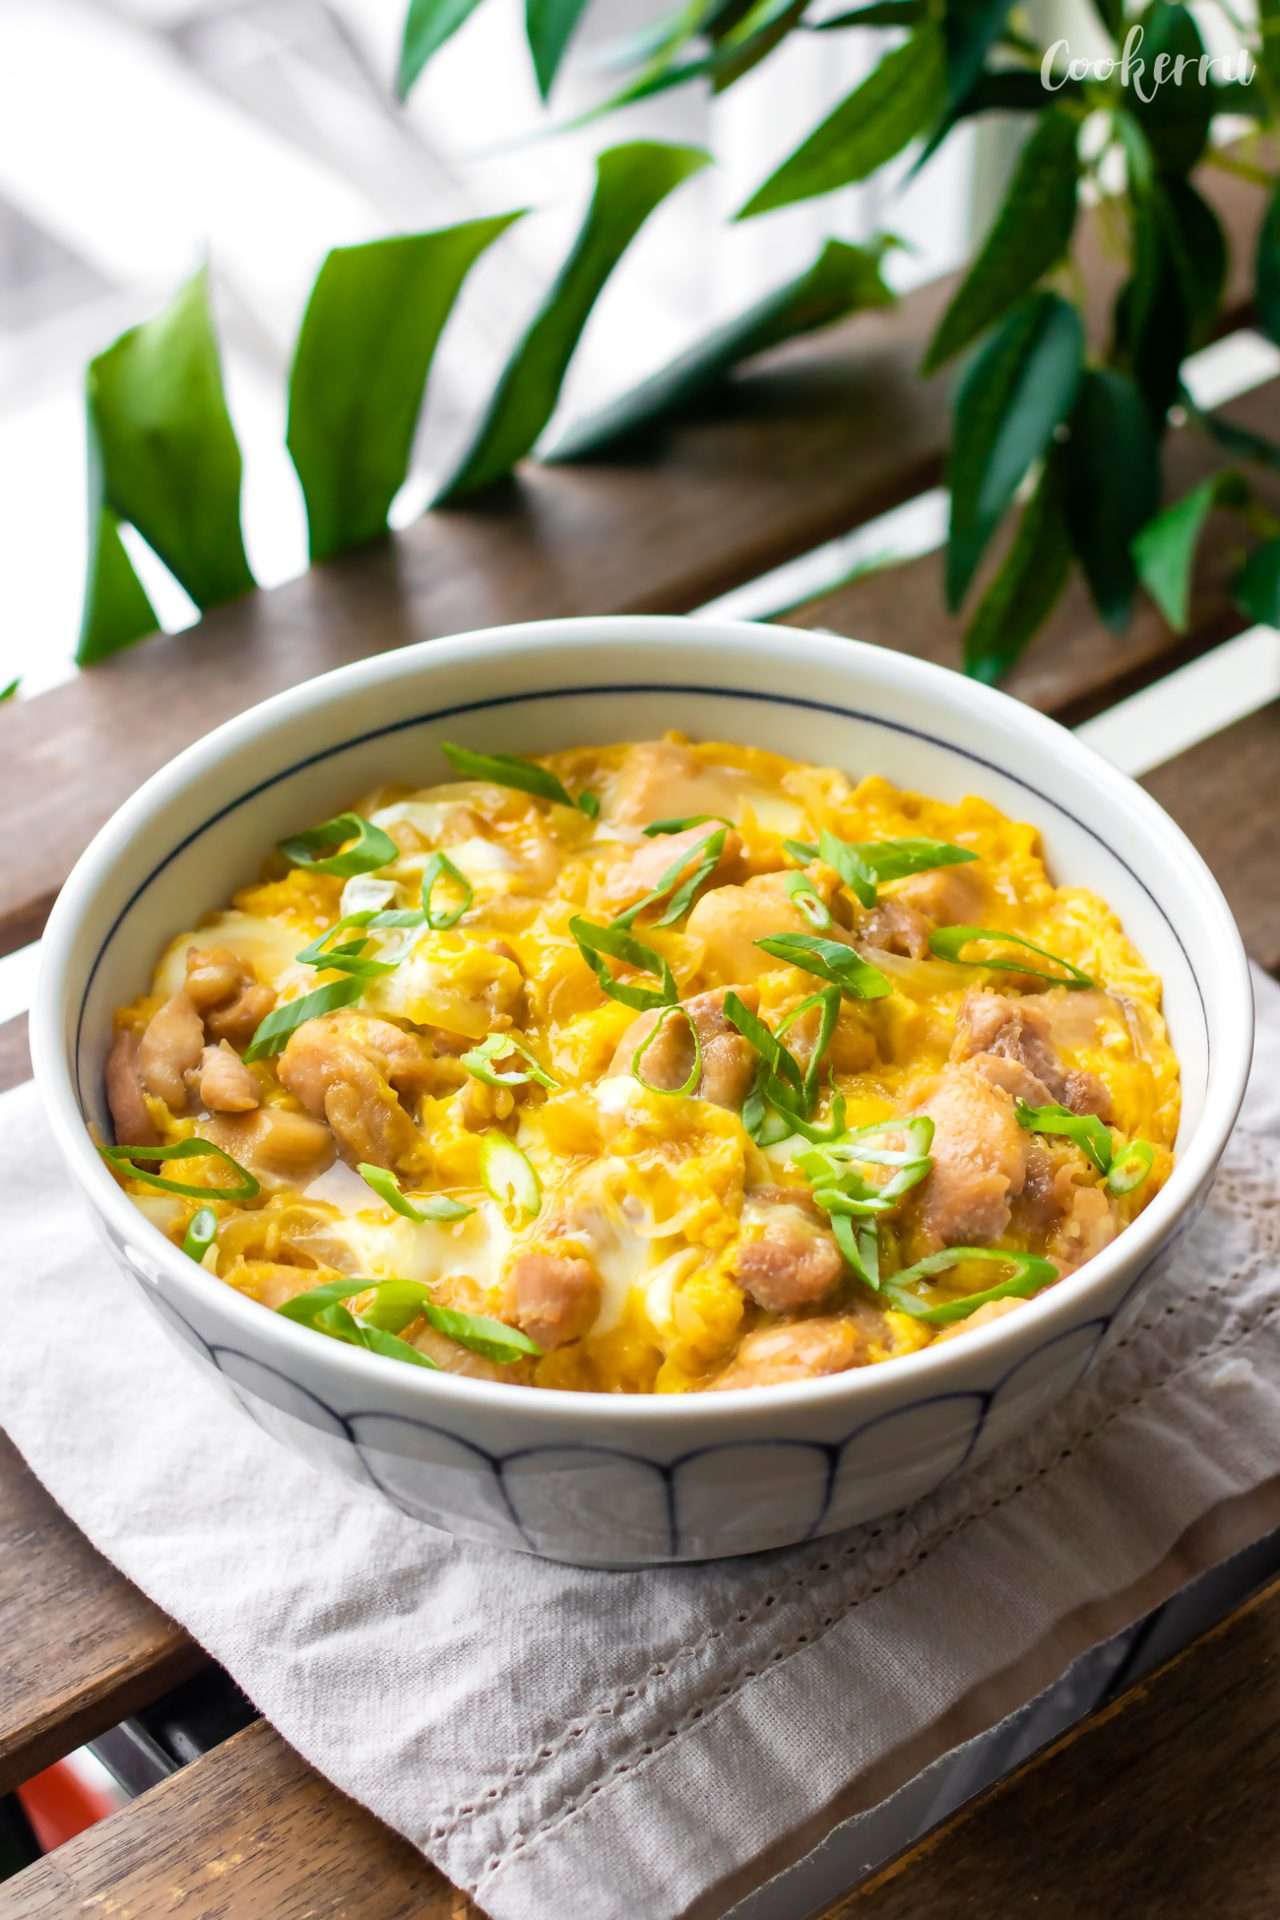 Oyakodon: The Authentic Japanese Chicken and Egg Rice Bowl Recipe and Variations